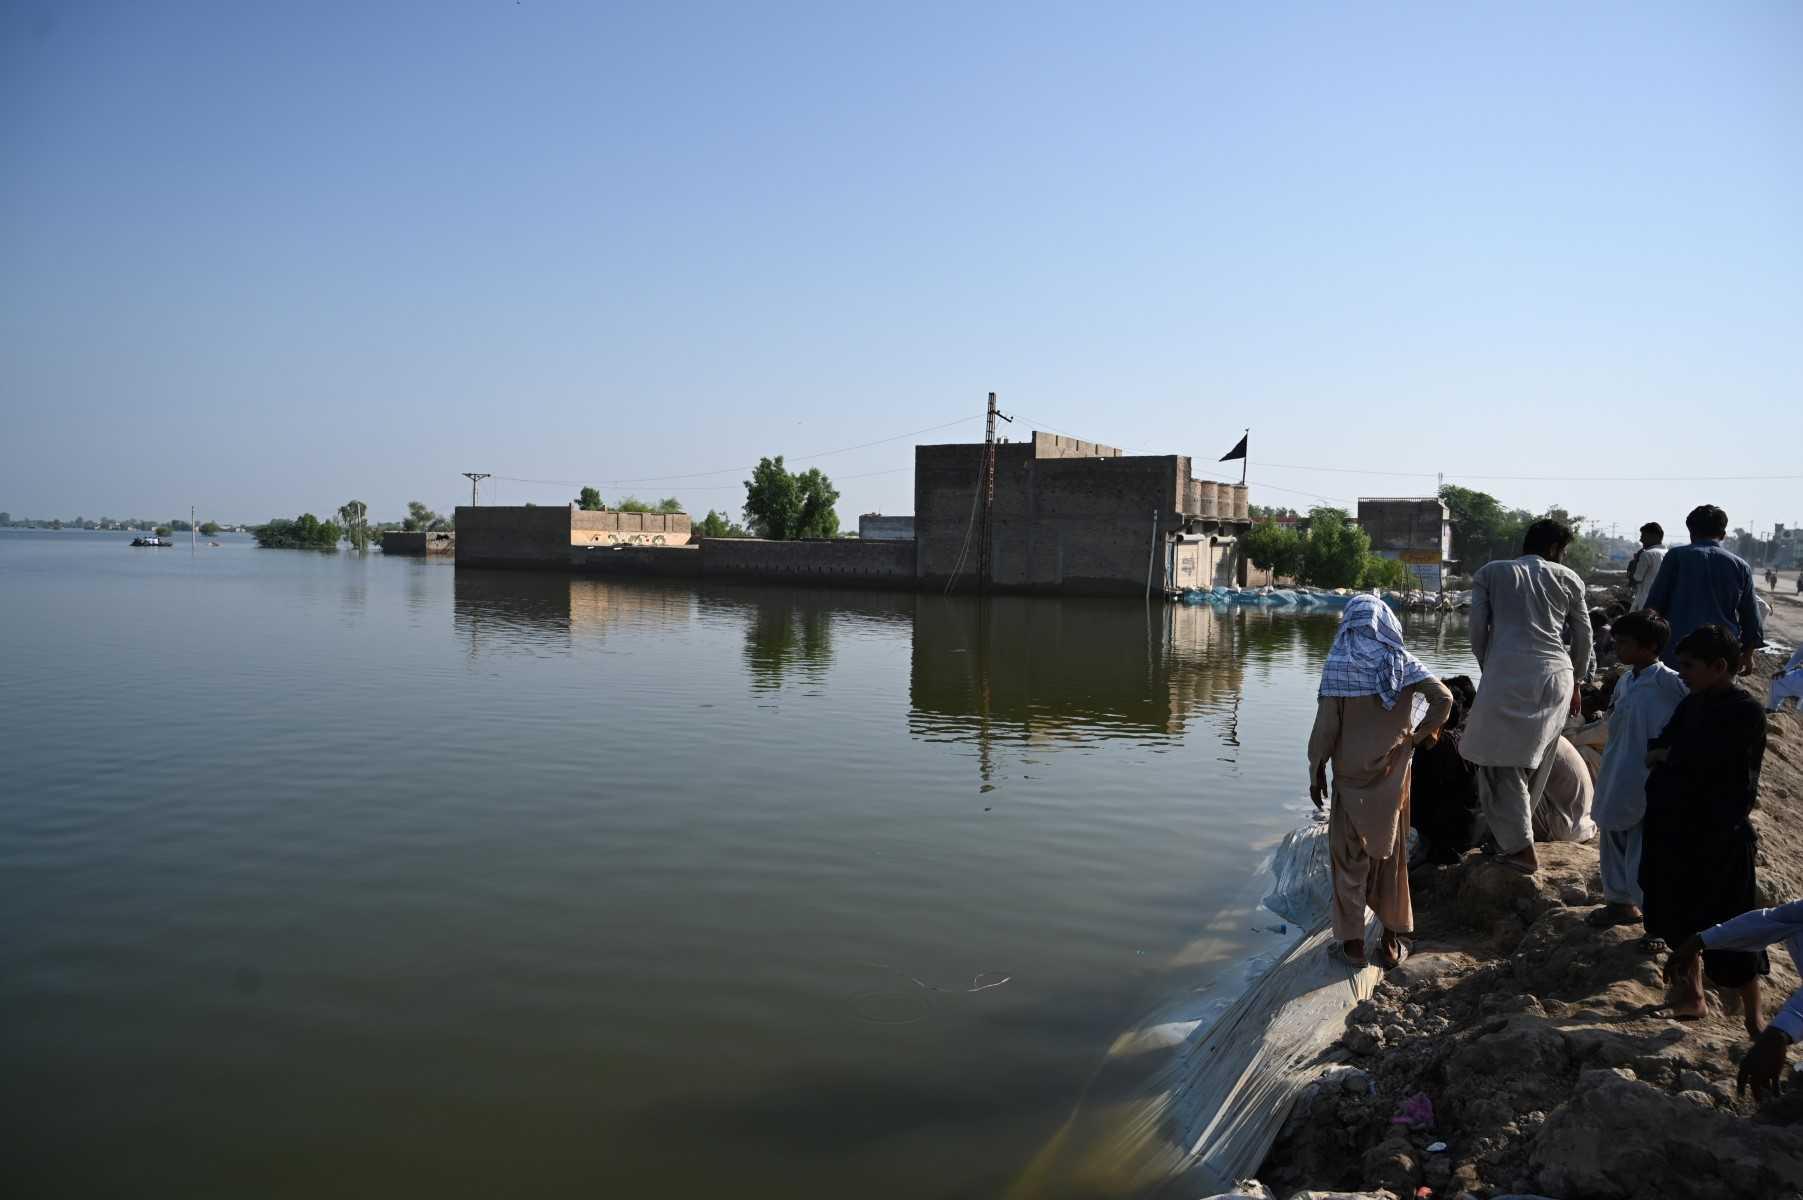 Flood-affected people gather by an embankment in Mehar city after heavy monsoon rains in Dadu district, Sindh province in Pakistan on Sept 9. Photo: AFP